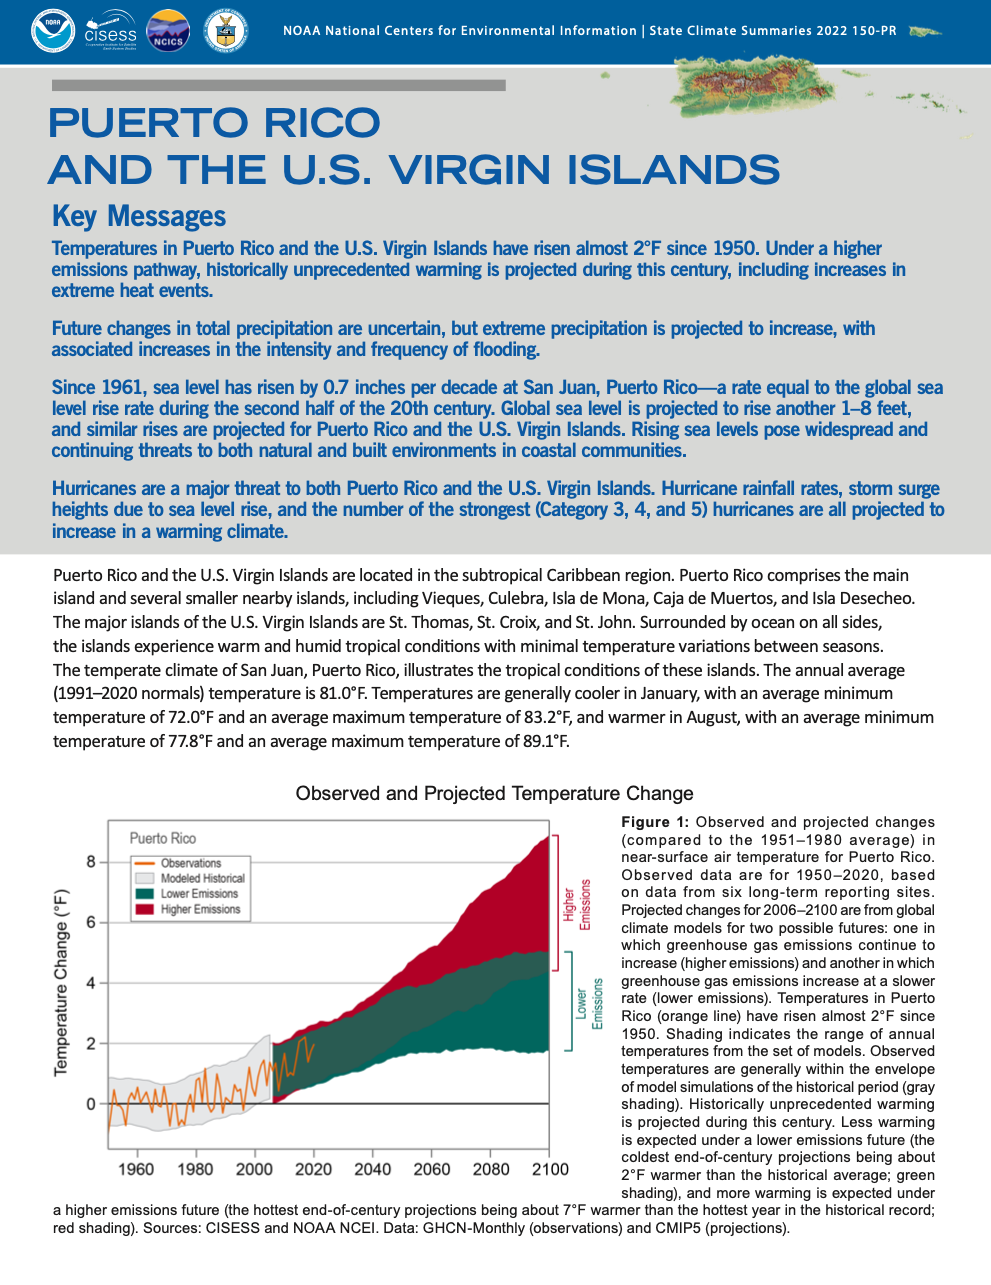 SUMMARY OF THE CLIMATE OF PUERTO RICO AND THE US VIRGIN ISLANDS